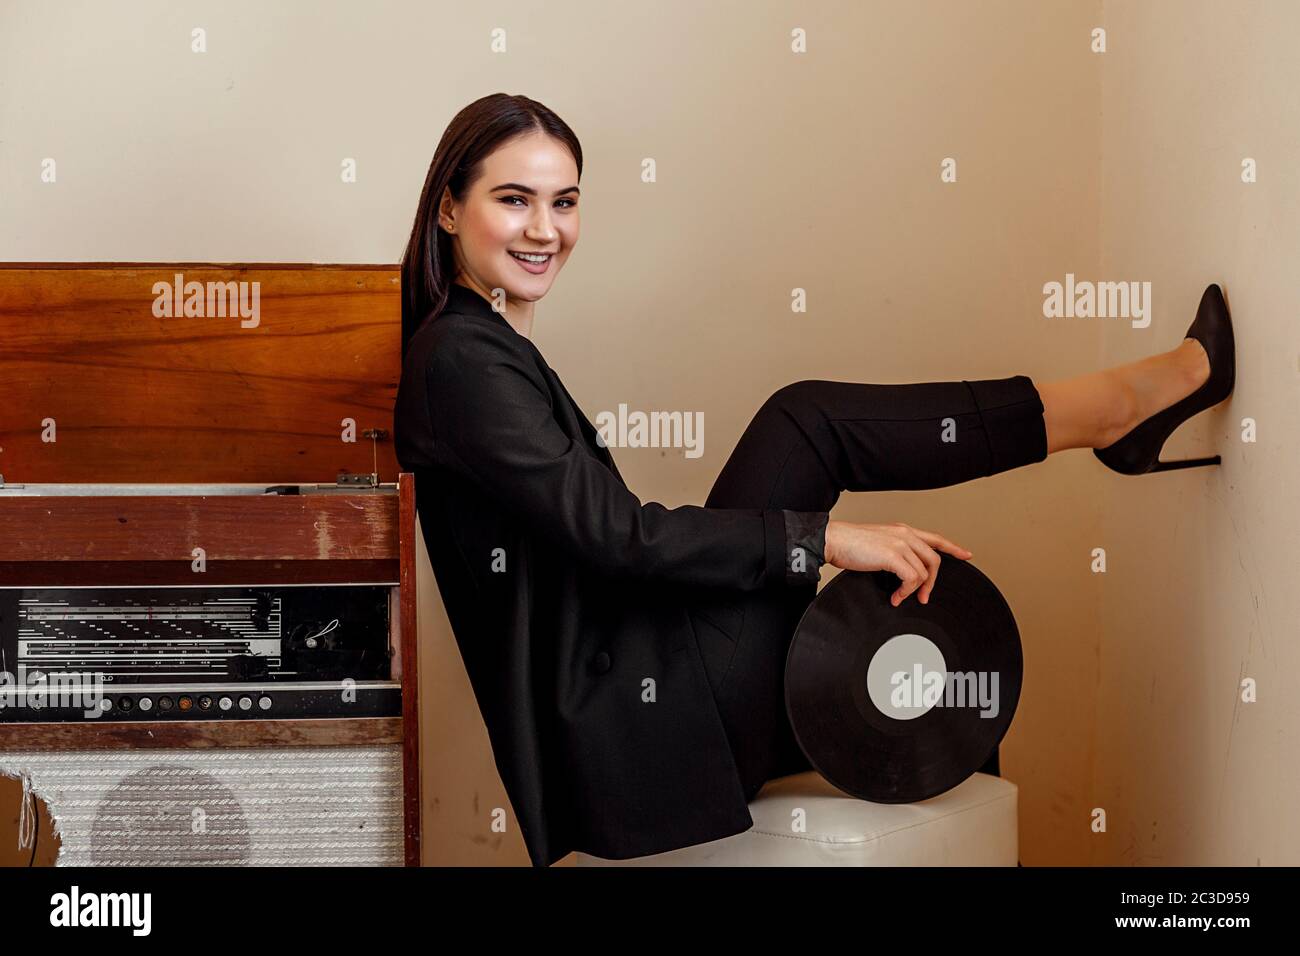 a beautiful Caucasian young woman in a black pantsuit and black sandals poses next to a vintage record player with a gramophone Stock Photo